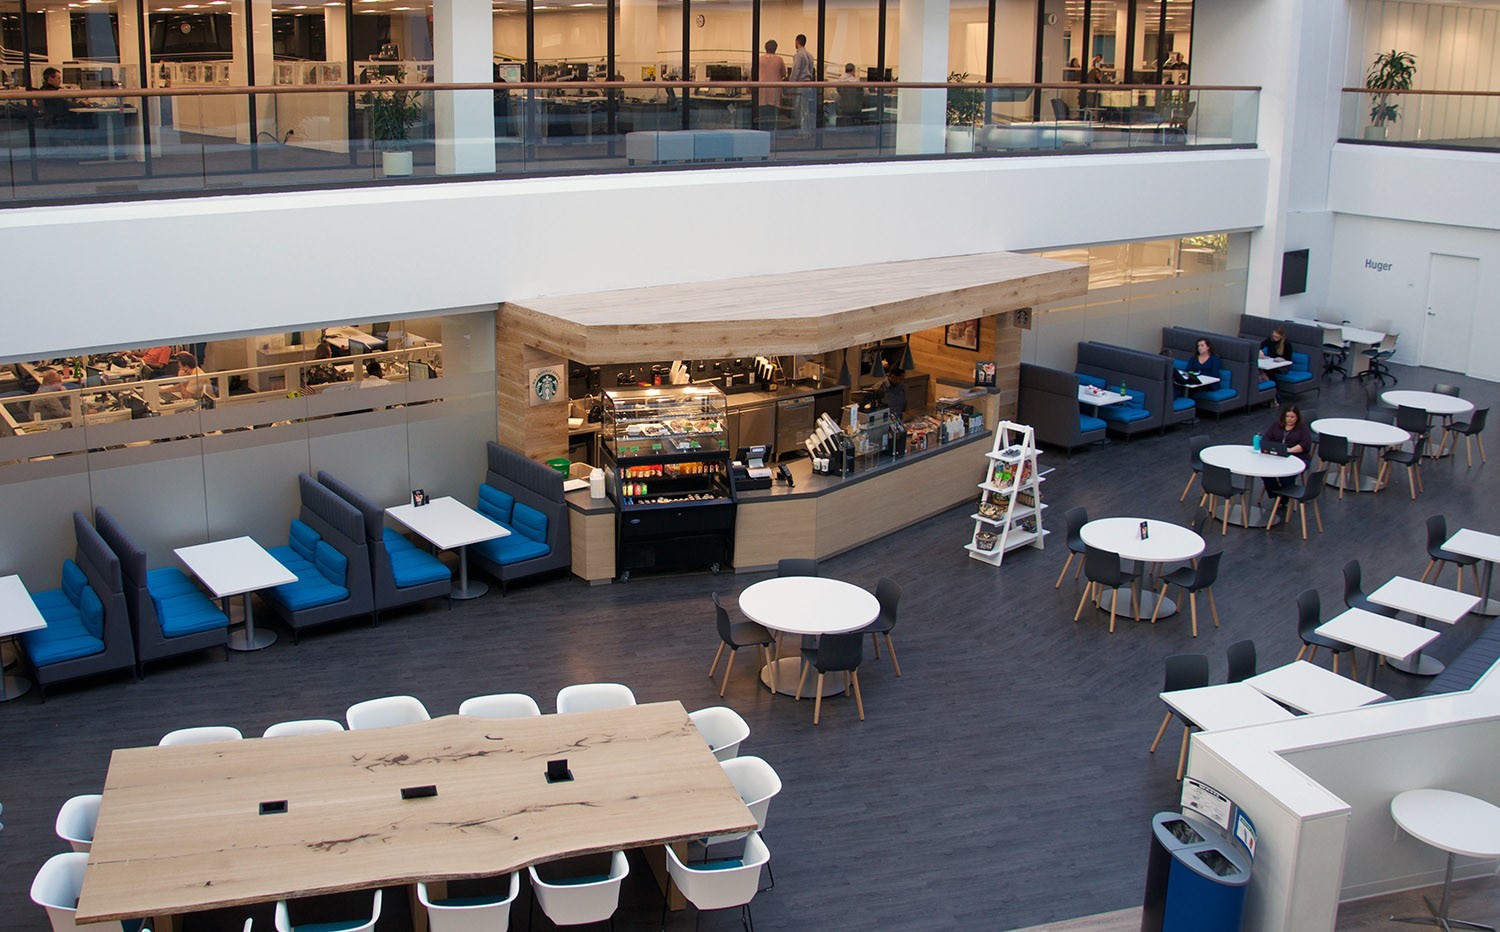 A $19.1 million renovation of Colonial Life's headquarters created an expansive cafeteria and eating area, one of the common areas the company now shares with Prisma Health employees. (Photo/Provided)